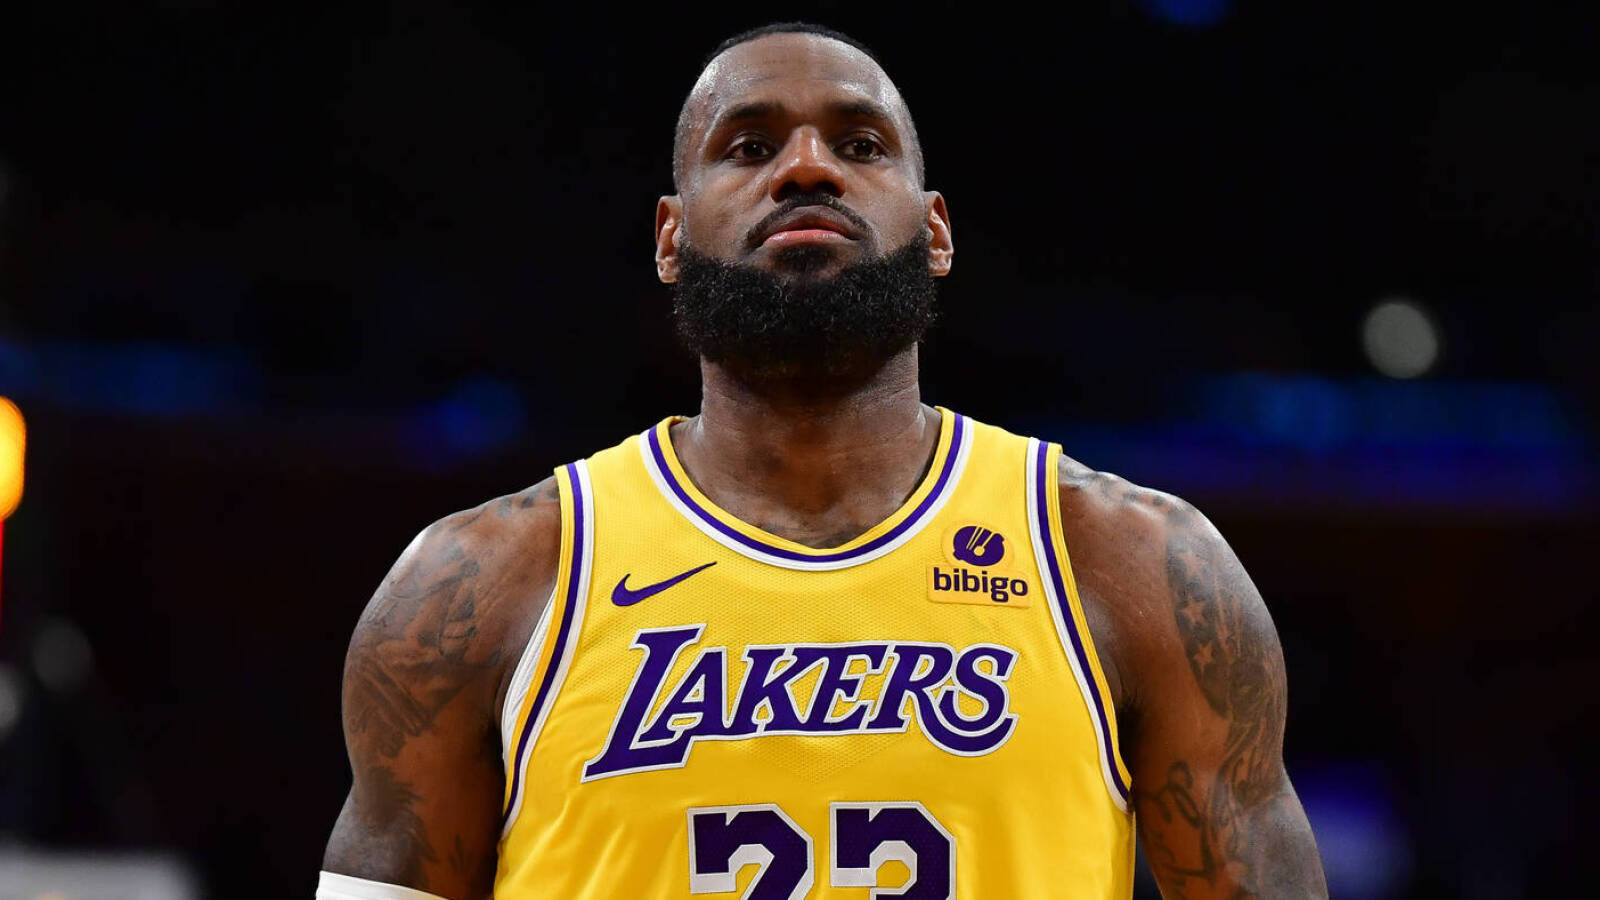 Insider refutes widely held narrative about LeBron James and son Bronny